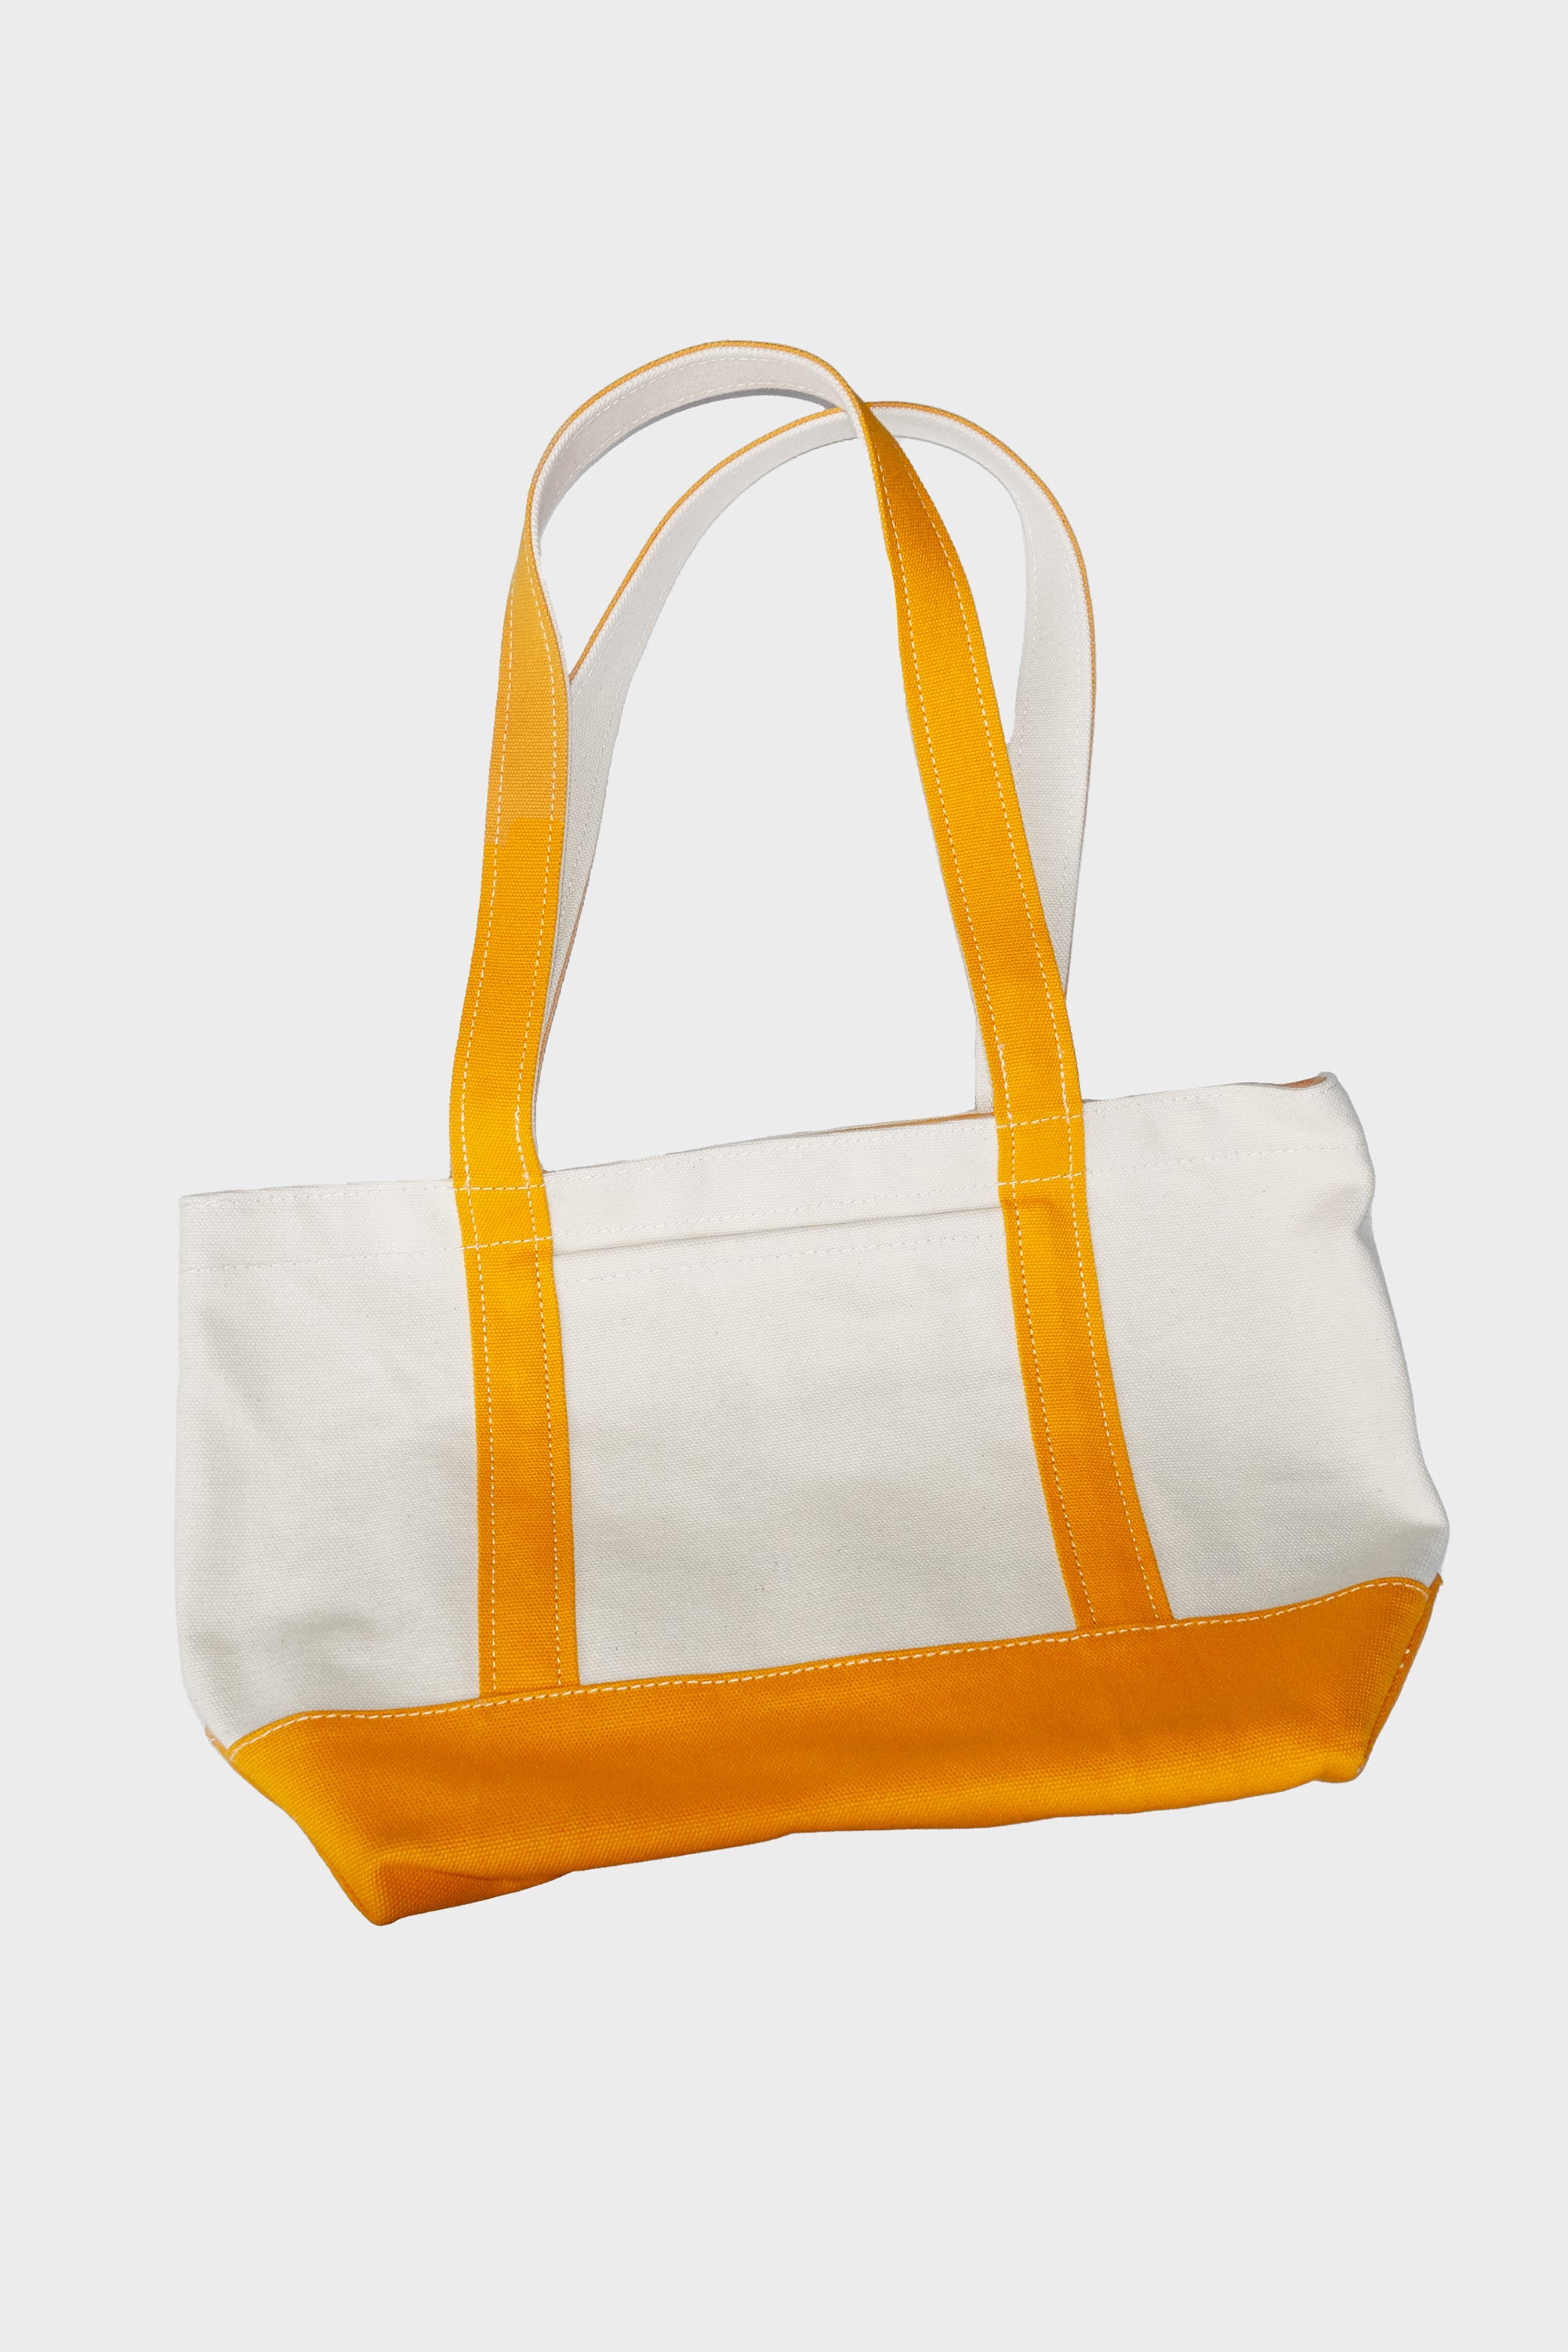 Small Heavyweight Canvas Tote in Tangerine